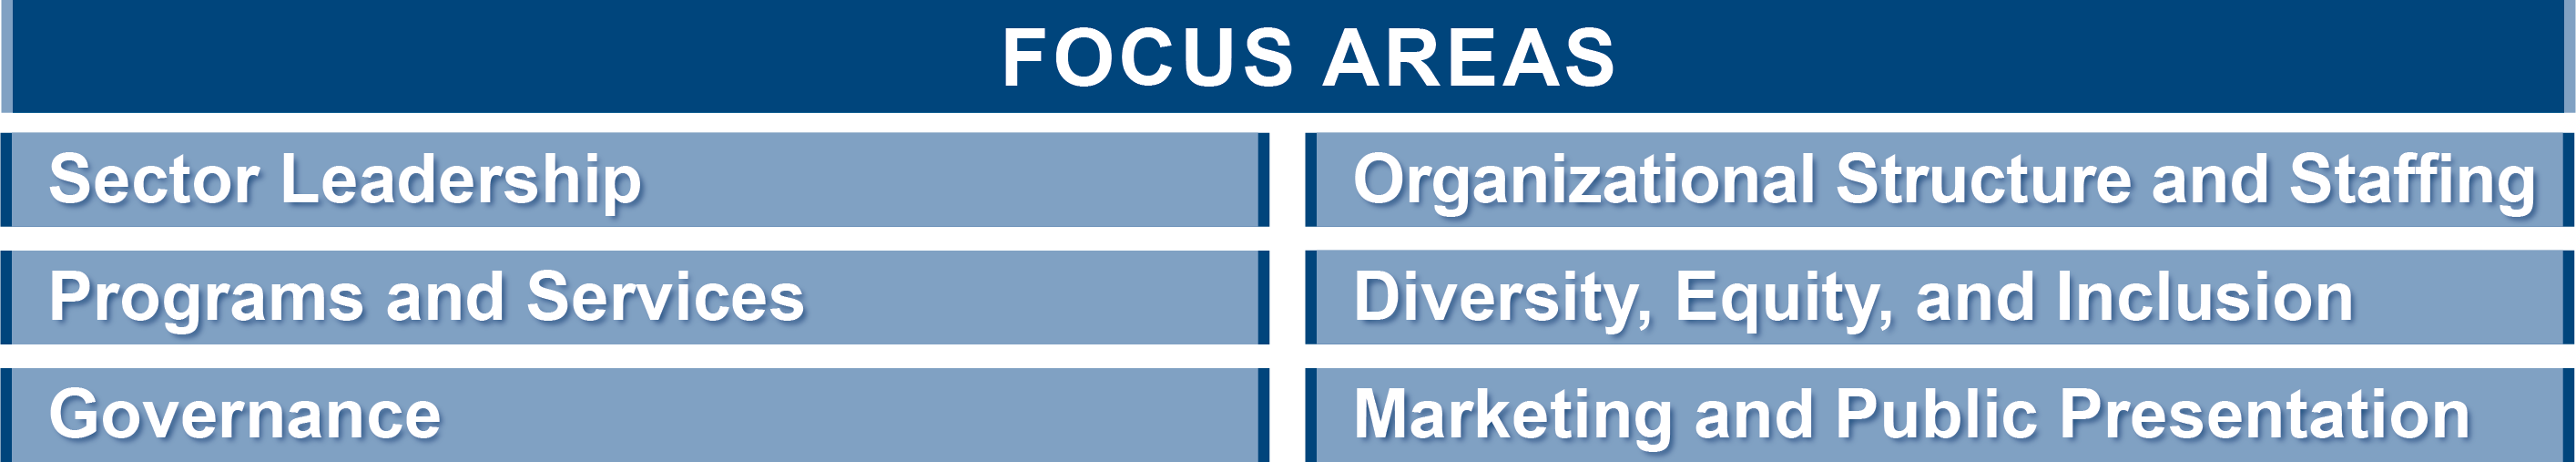 Focus areas listed in following text